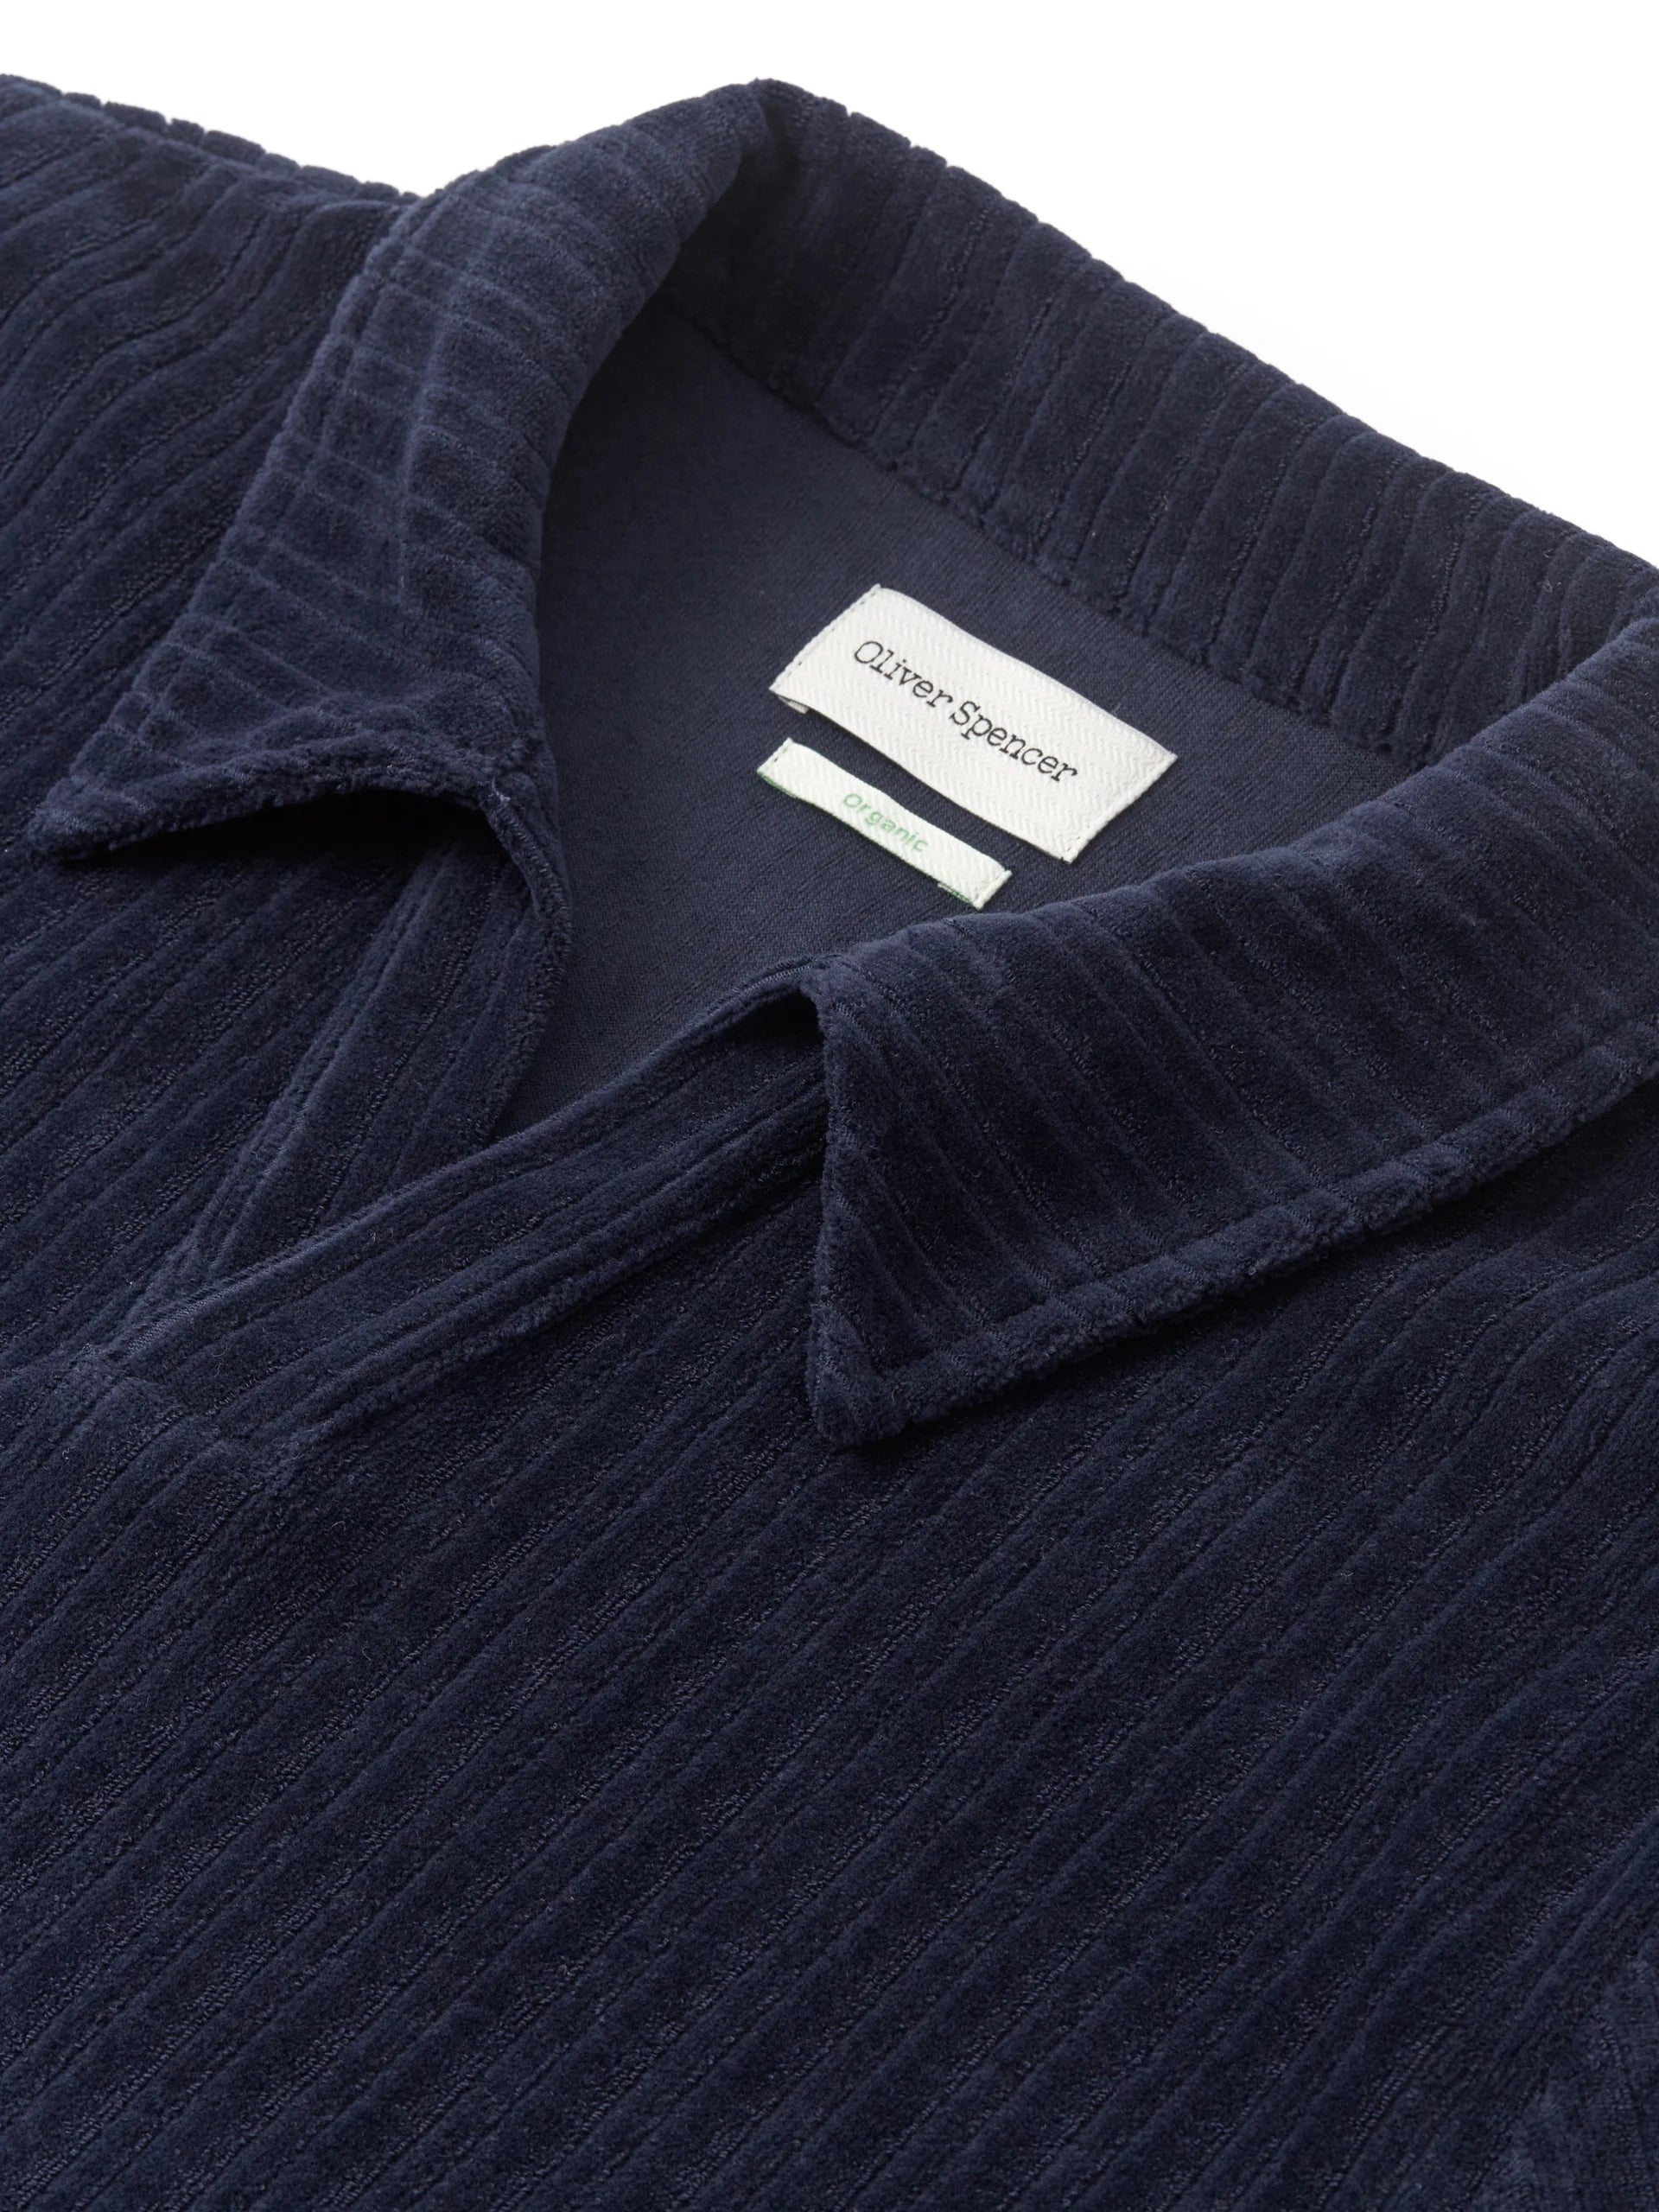 AUSTELL S/S POLO SHIRT - WILLOW NAVY